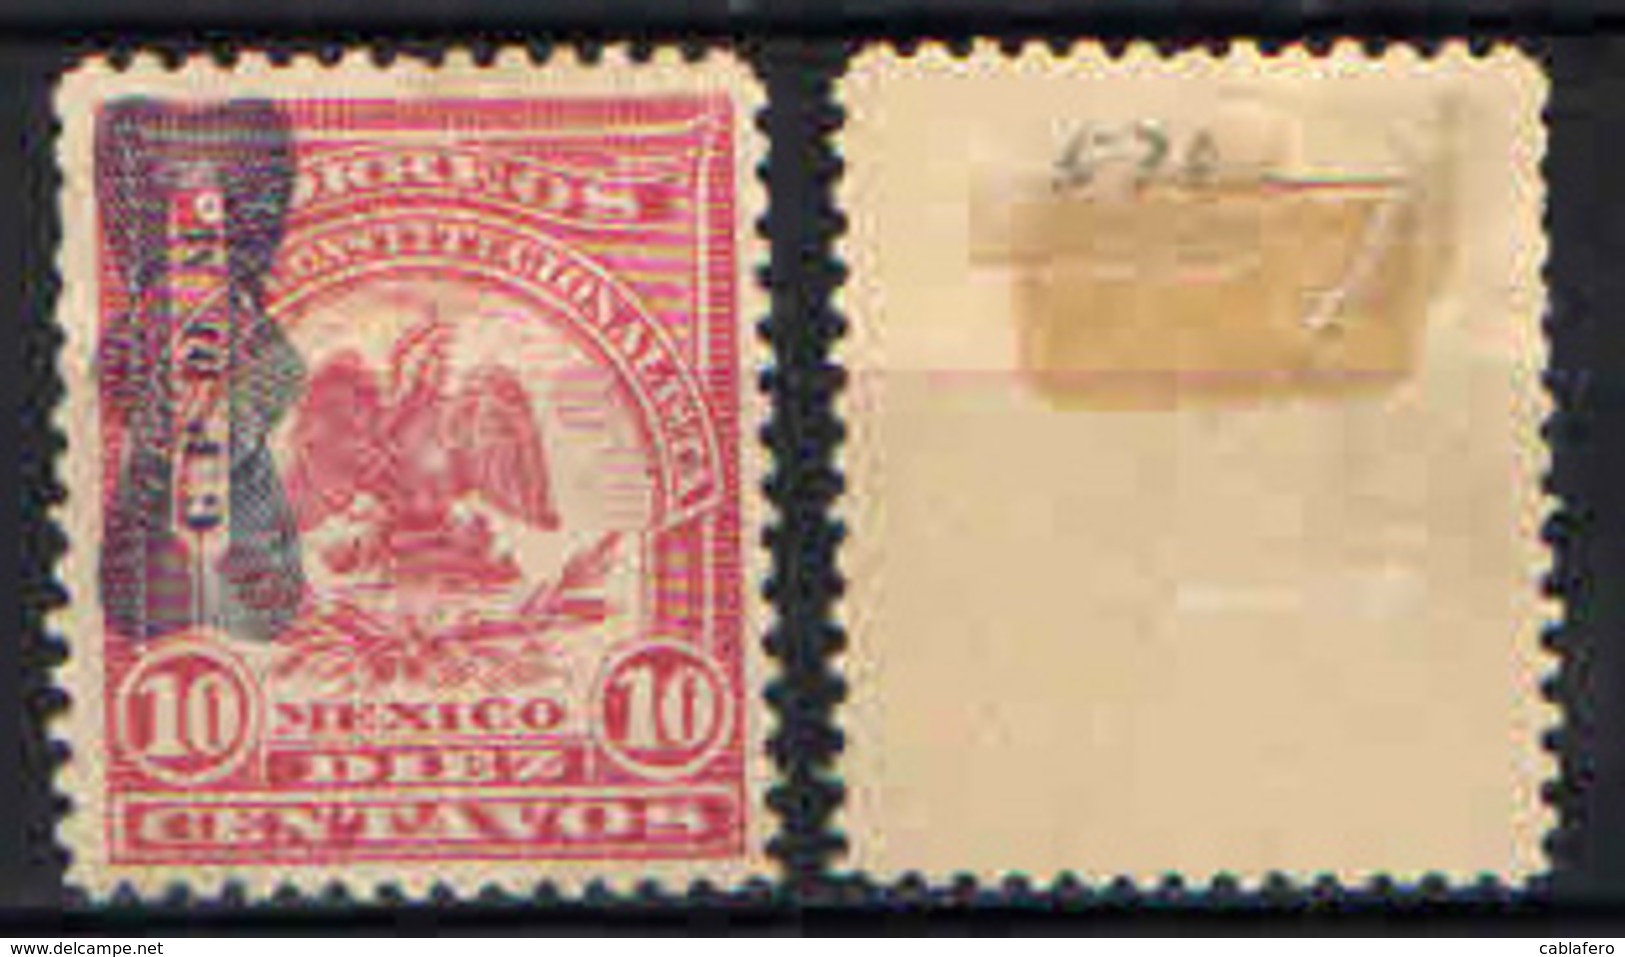 MESSICO - 1916 - Coat Of Arms - OVERPRINTED - MH - Mexiko